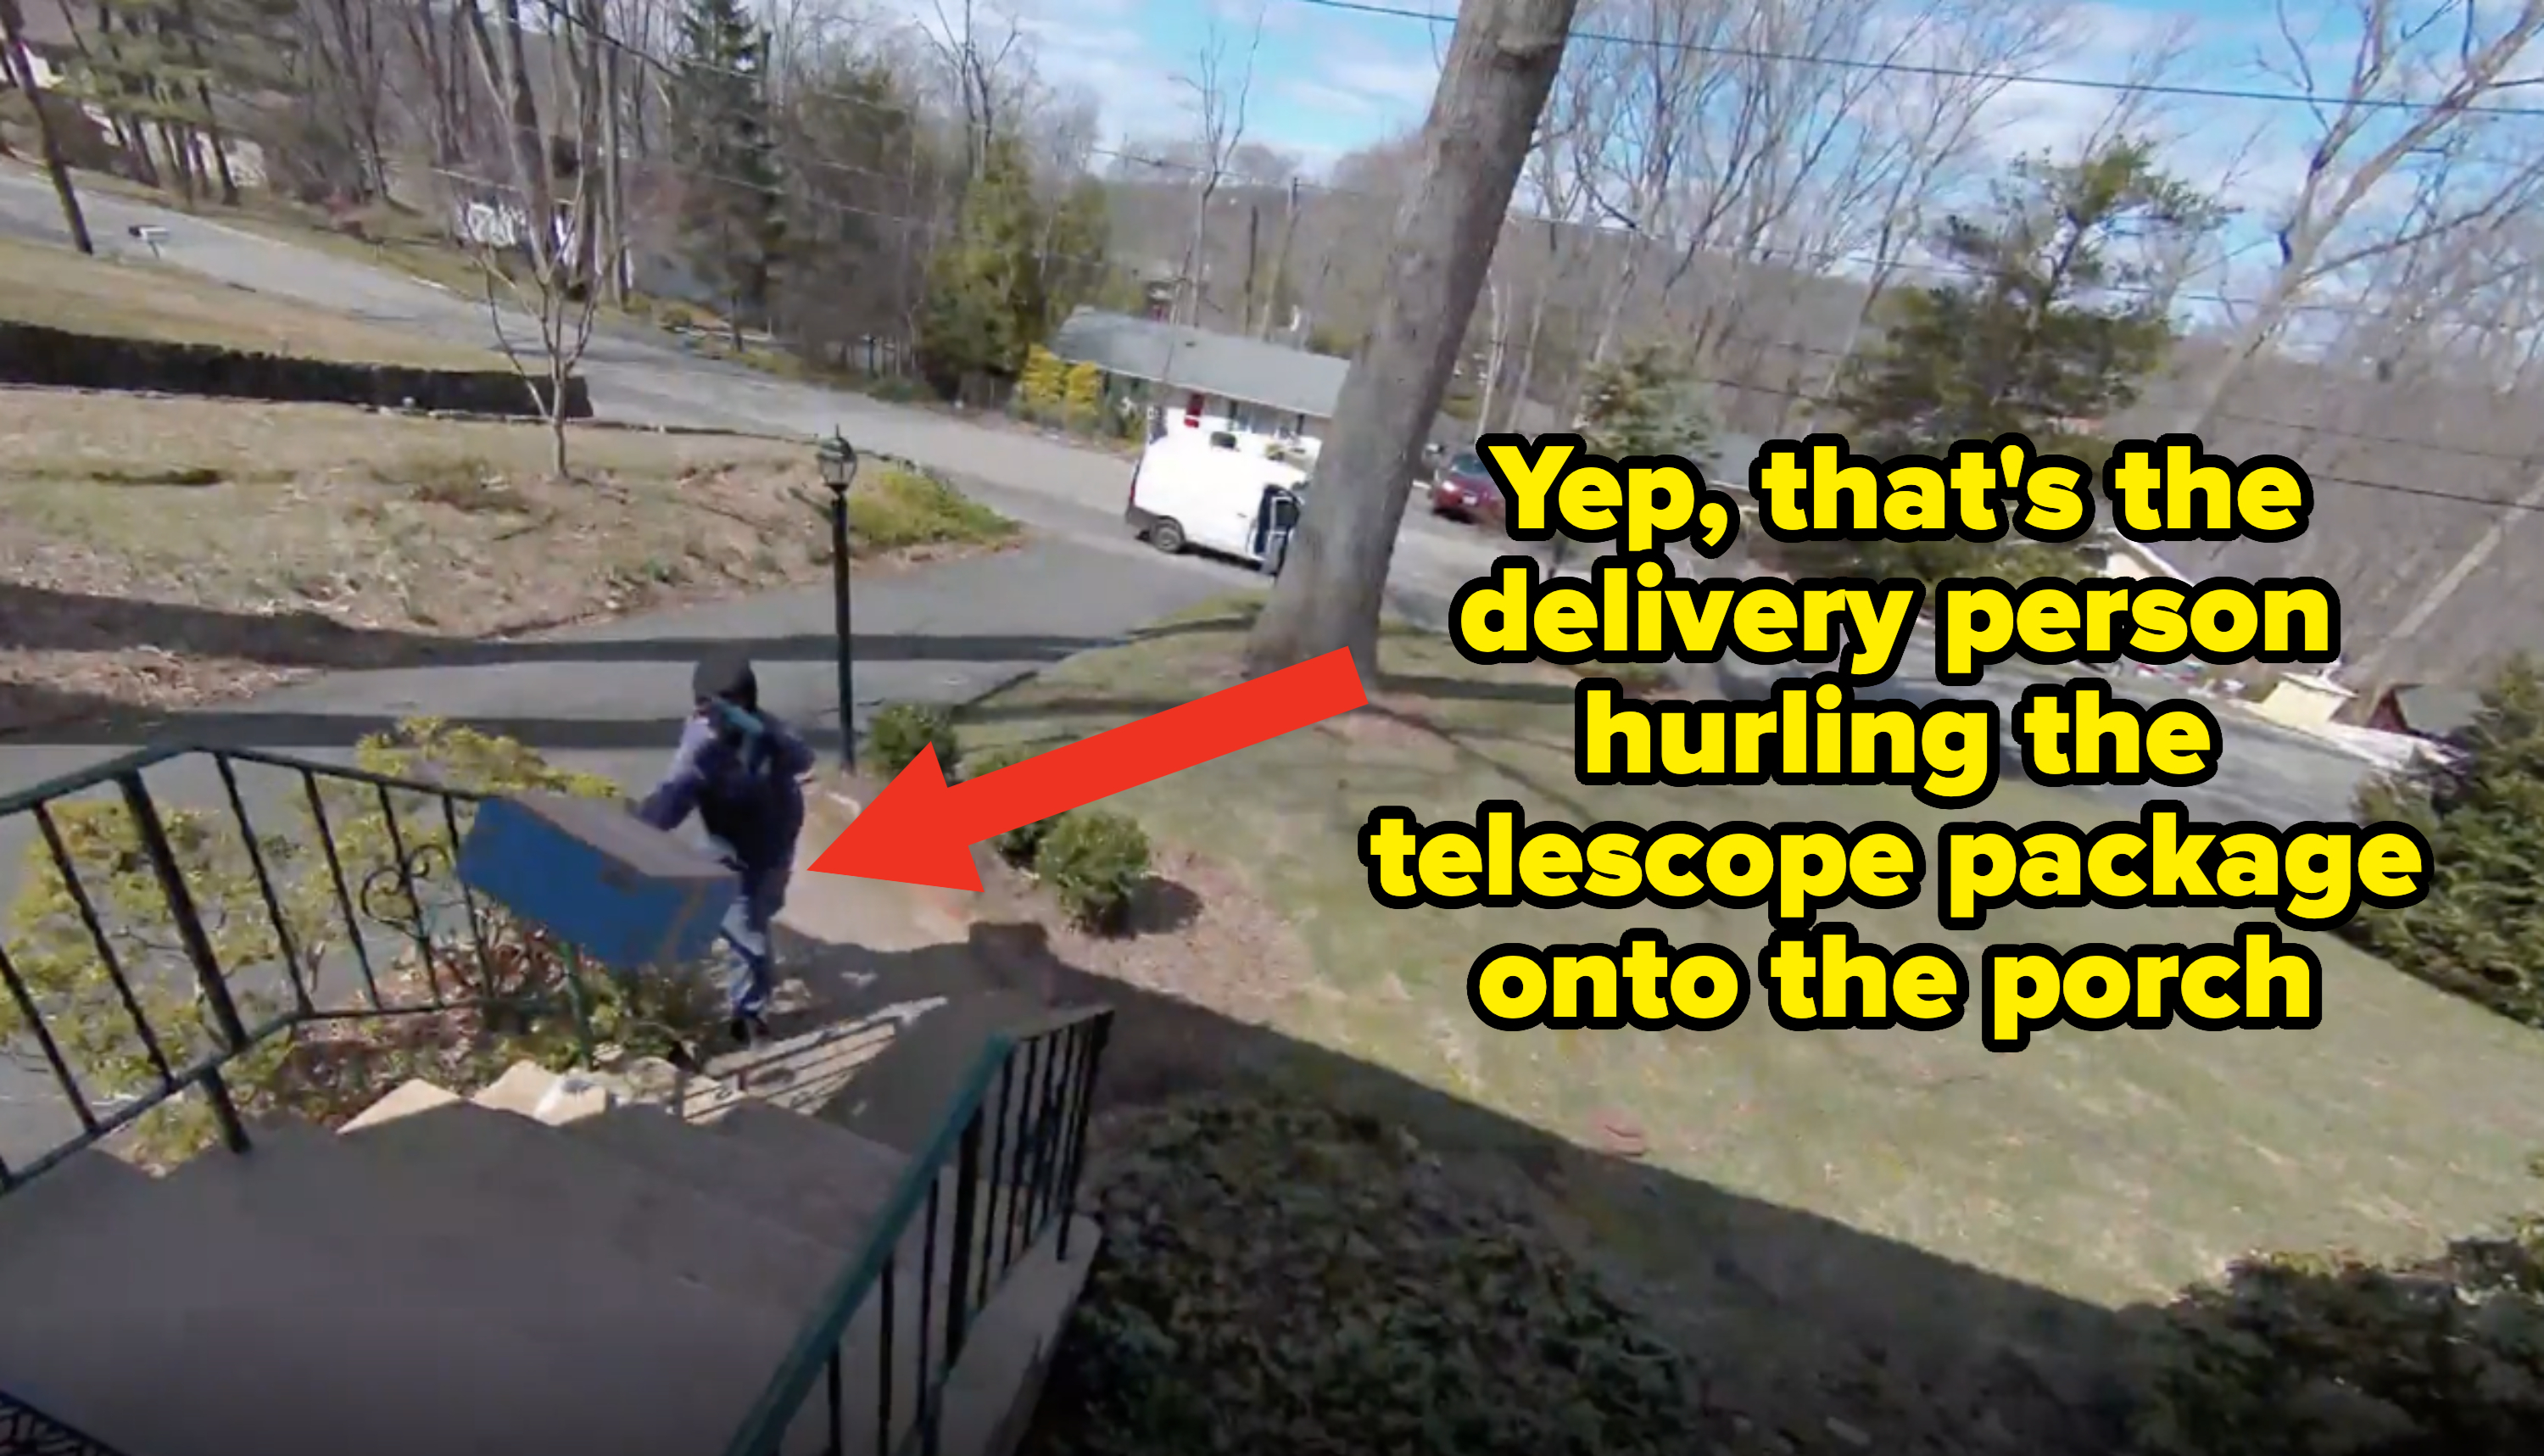 &quot;Yep, that&#x27;s the delivery person hurling the telescope package onto the porch&quot;